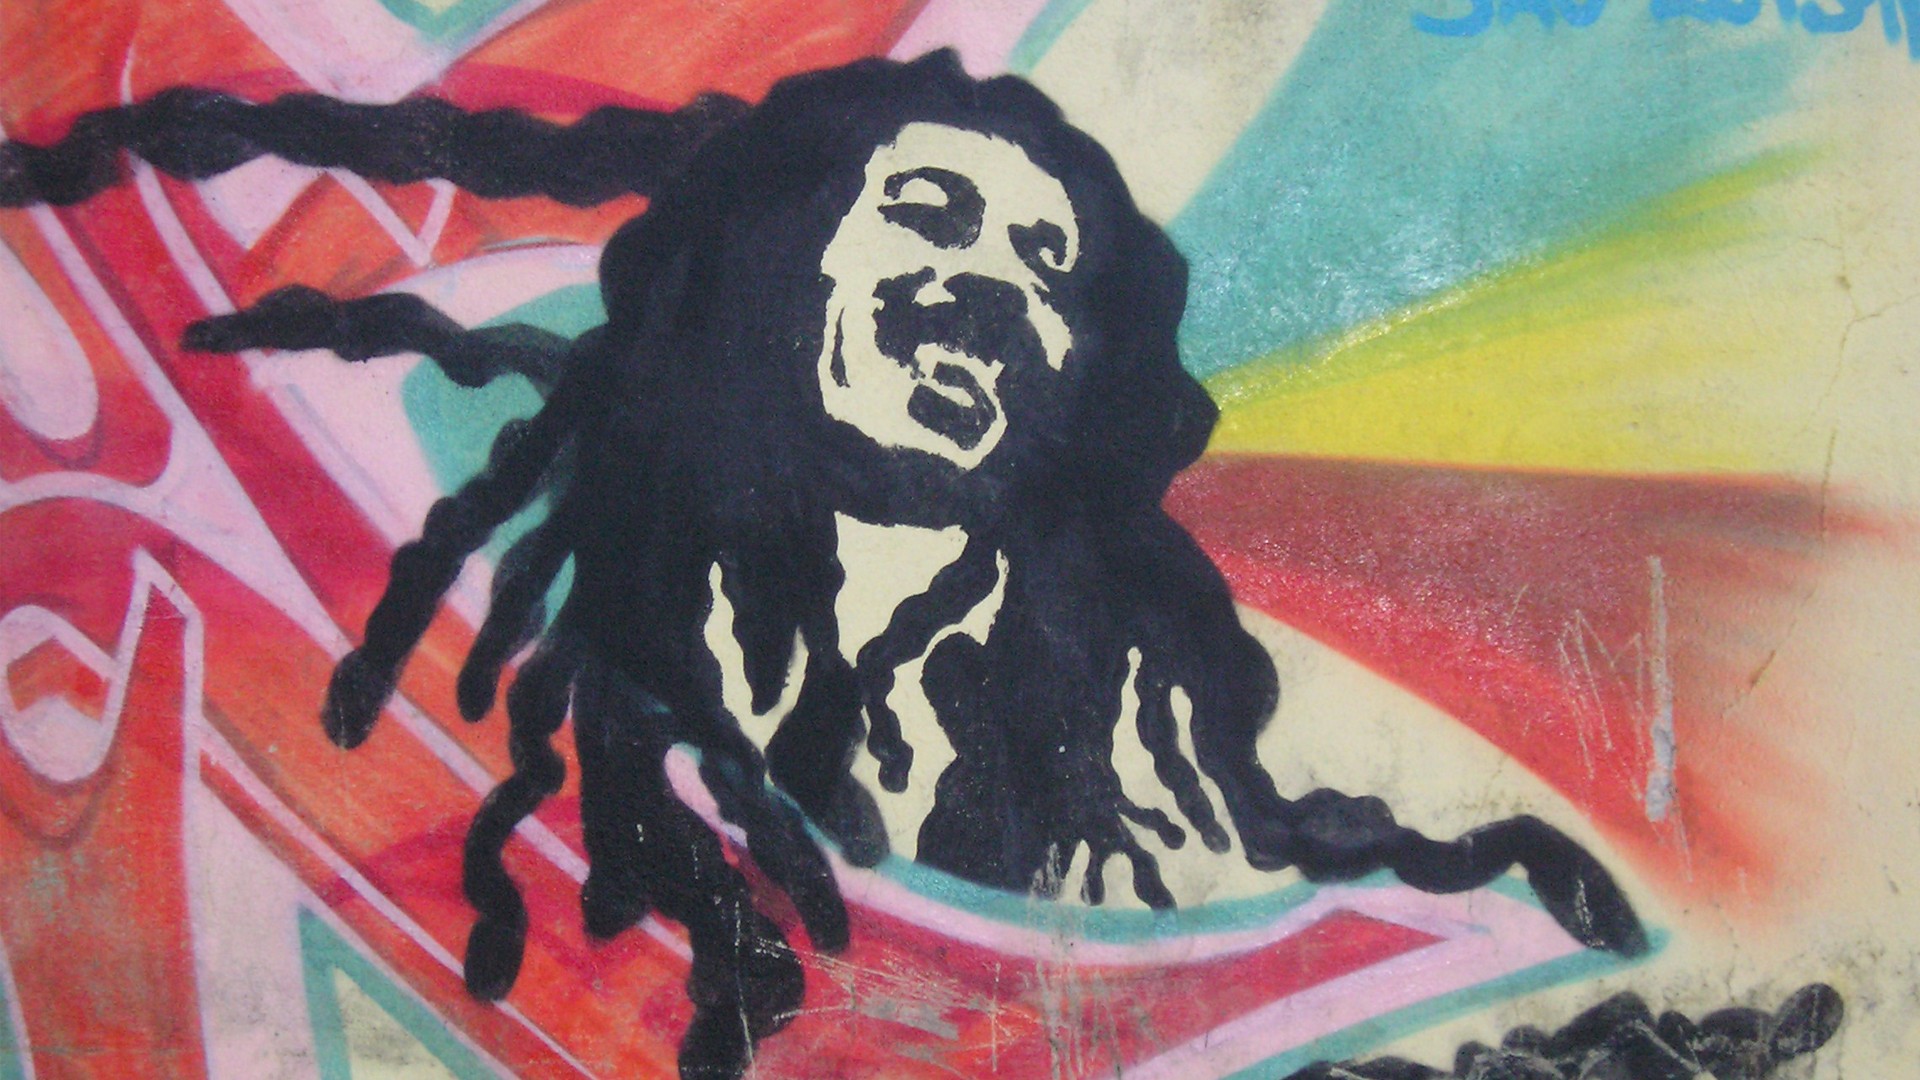 Bob Marley, P, Wallpapers, Hd, Wallpaper, Famous Singer, - Bob Marley Graffiti Wallpapers Hd , HD Wallpaper & Backgrounds